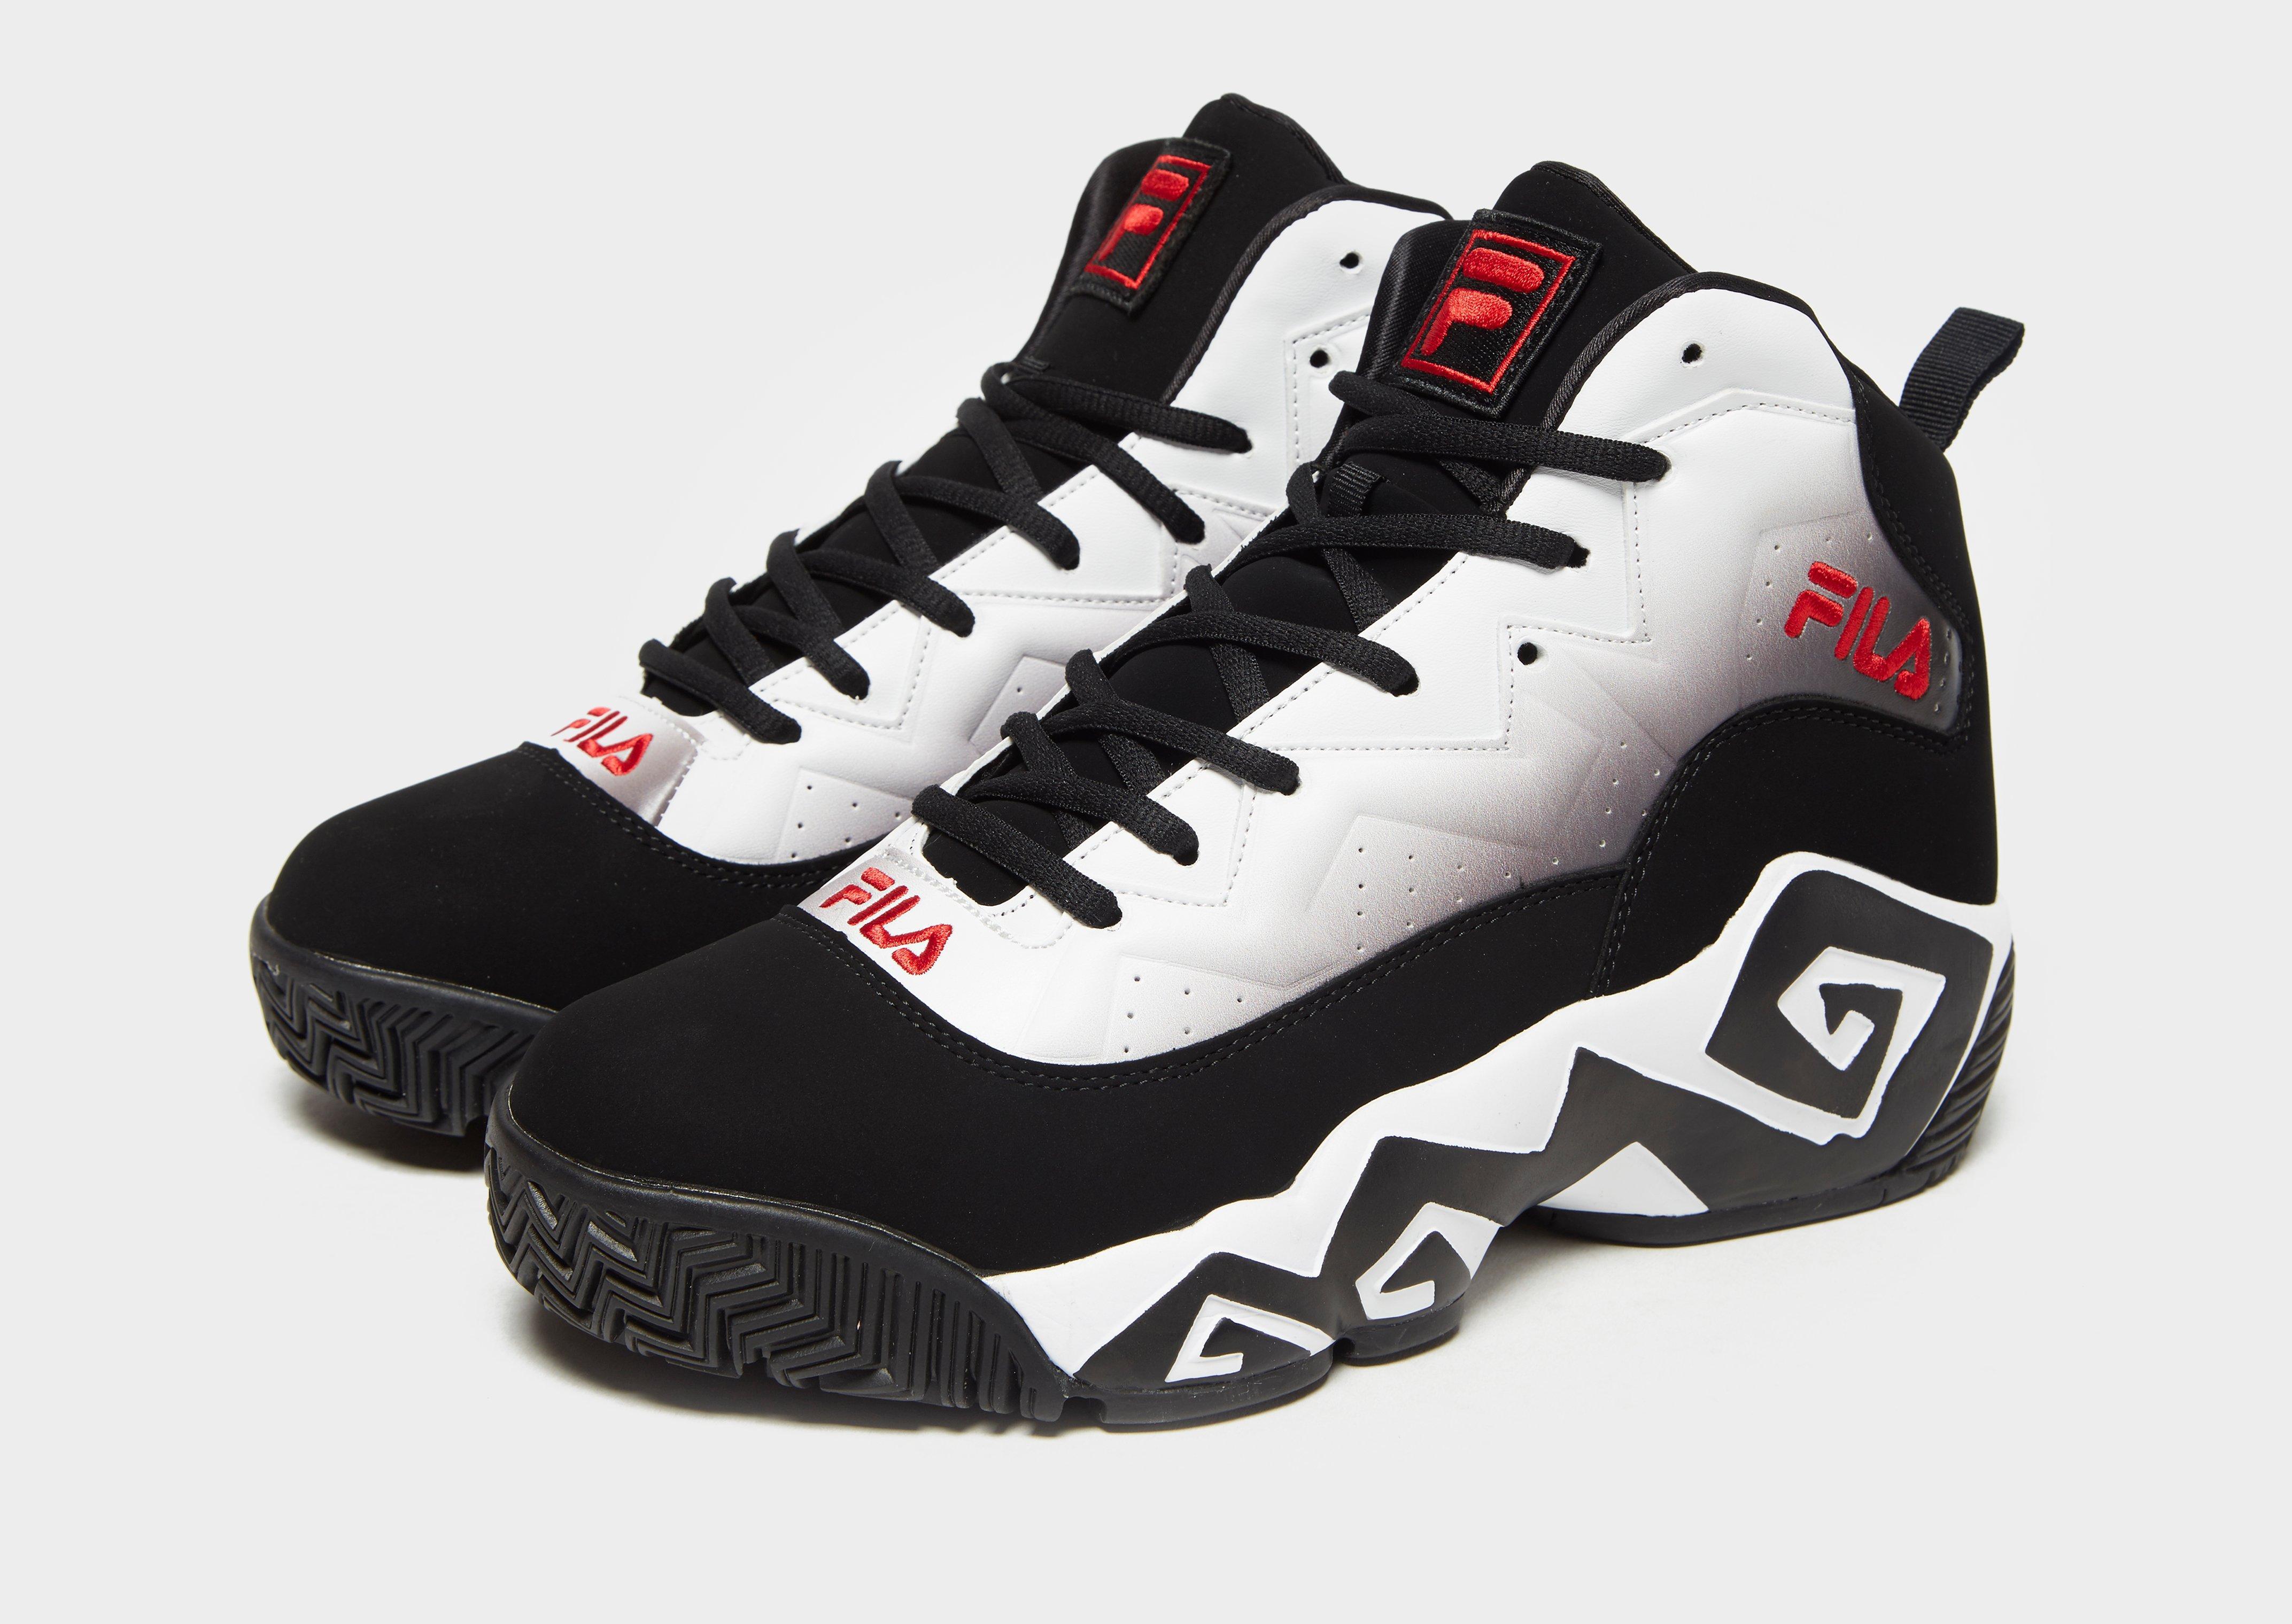 Fila Mb Black And White Hotsell, SAVE 40% - oxforddowns.com